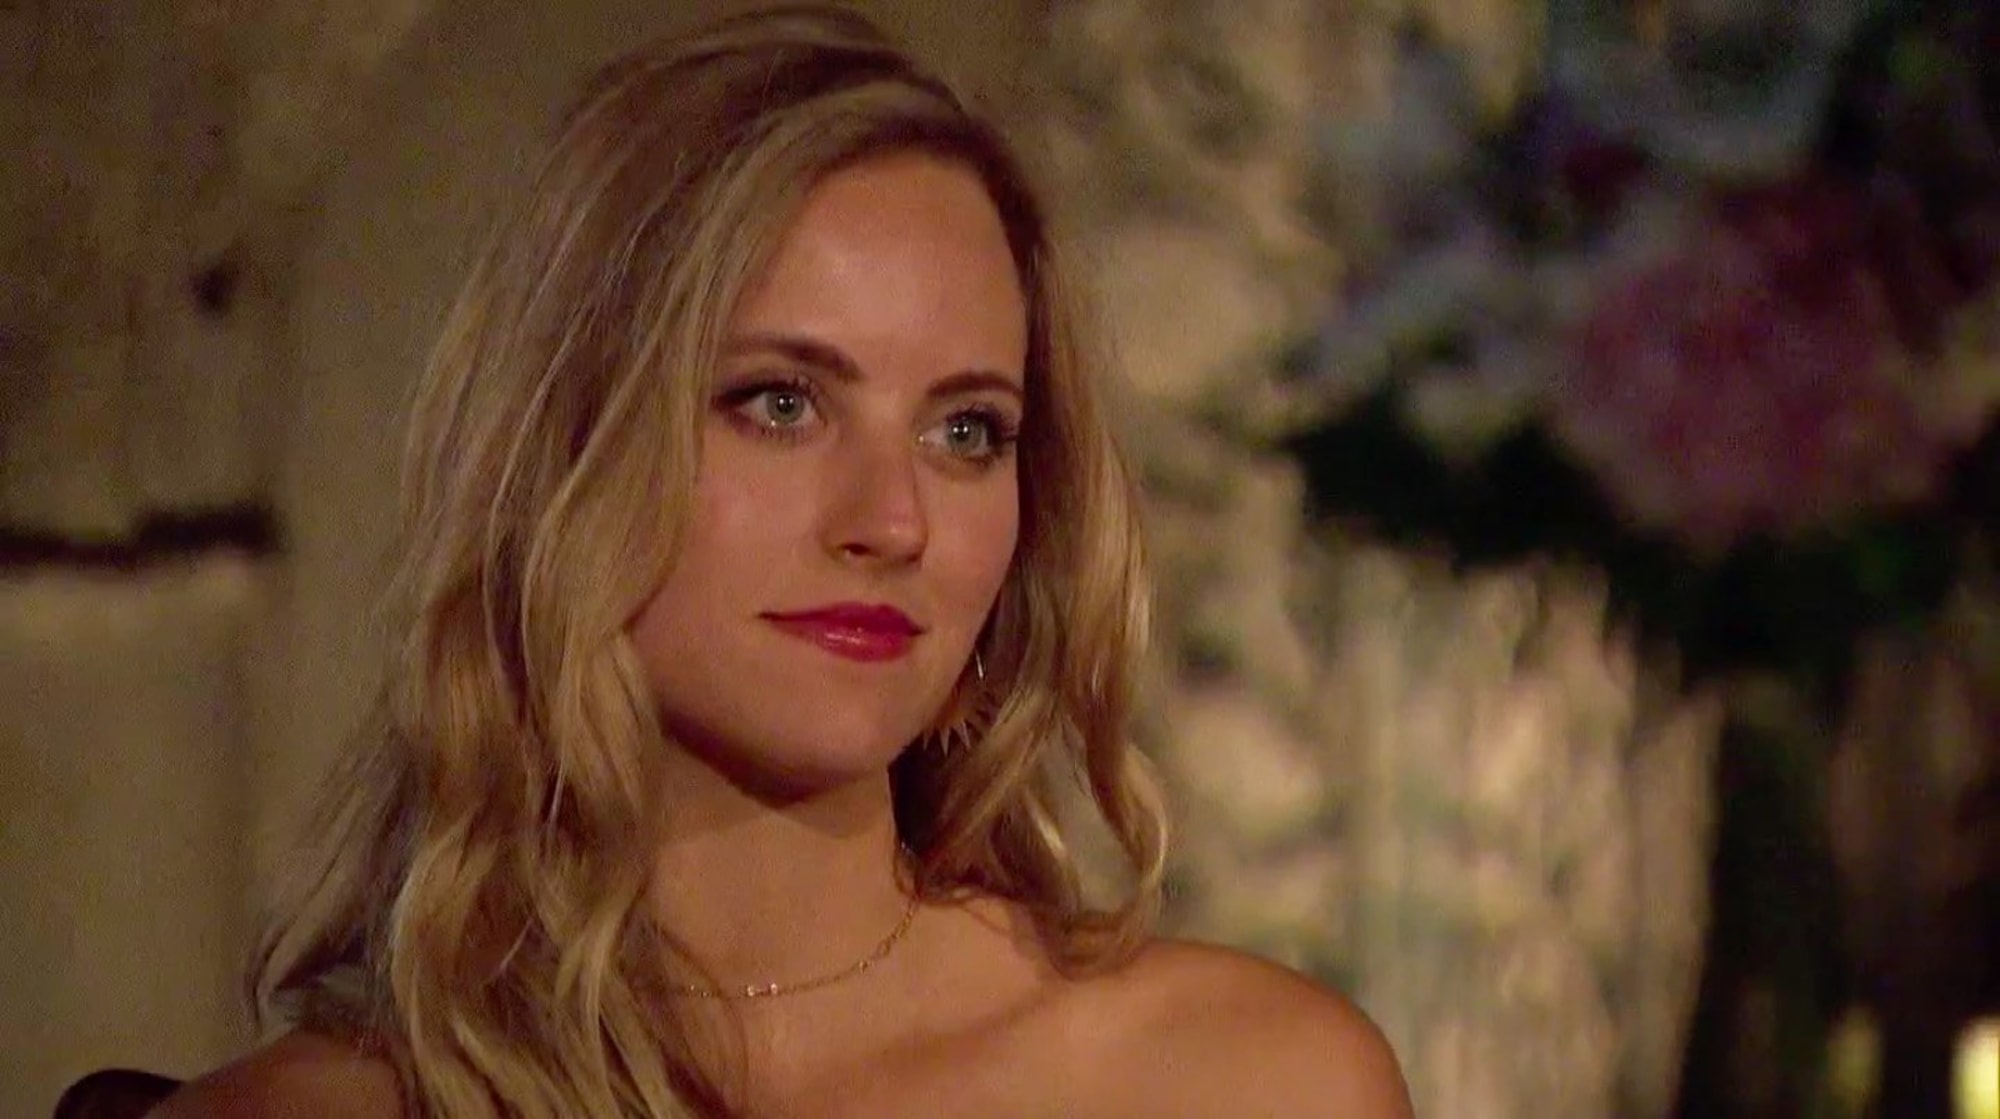 bachelor contestant who slept with cameraman